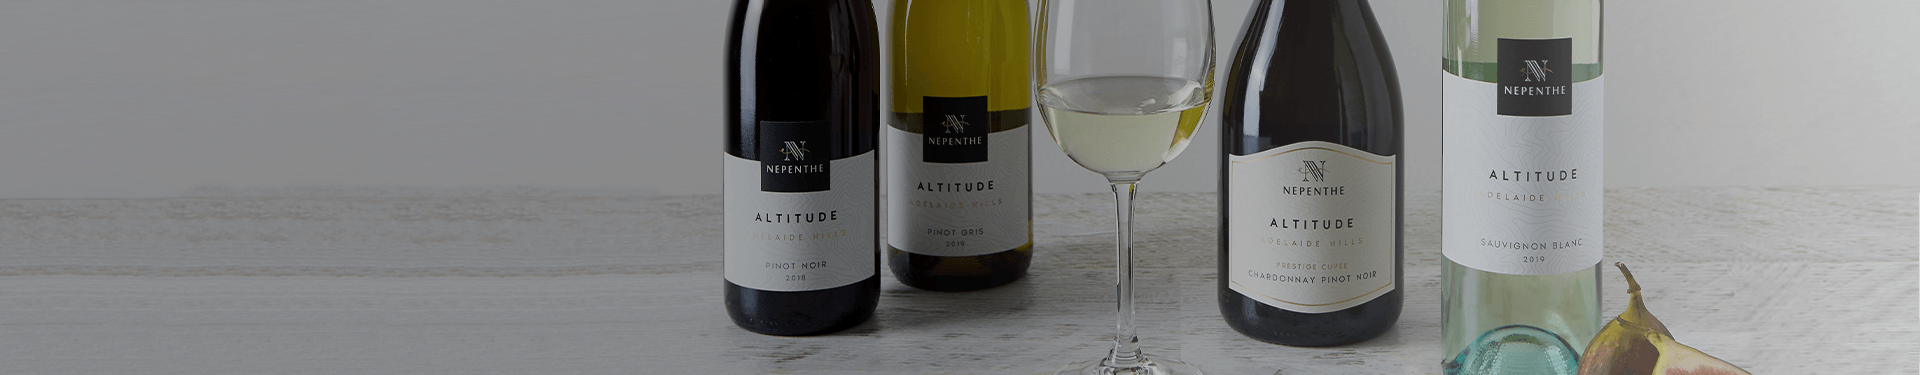 Nepenthe Altitude wine range and glass of sparkling cuvee